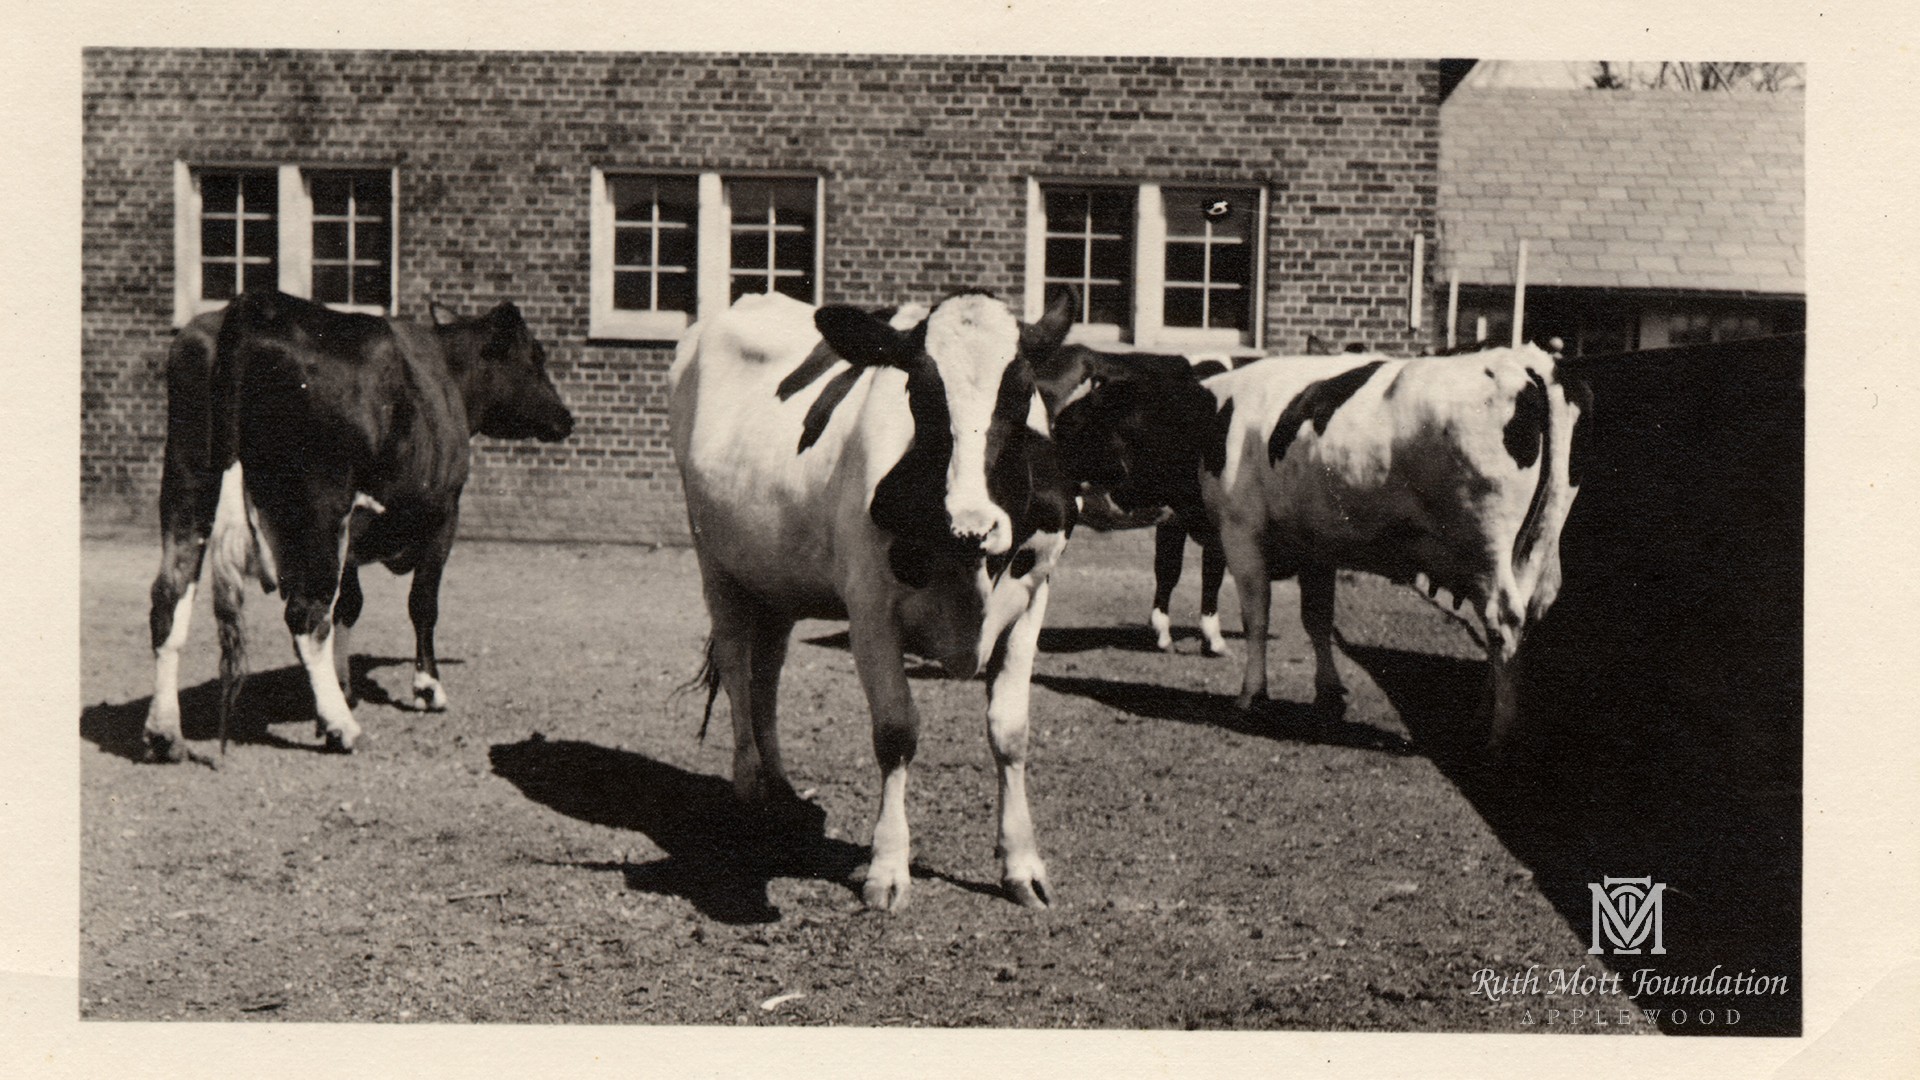 Historic image of cows at Applewood